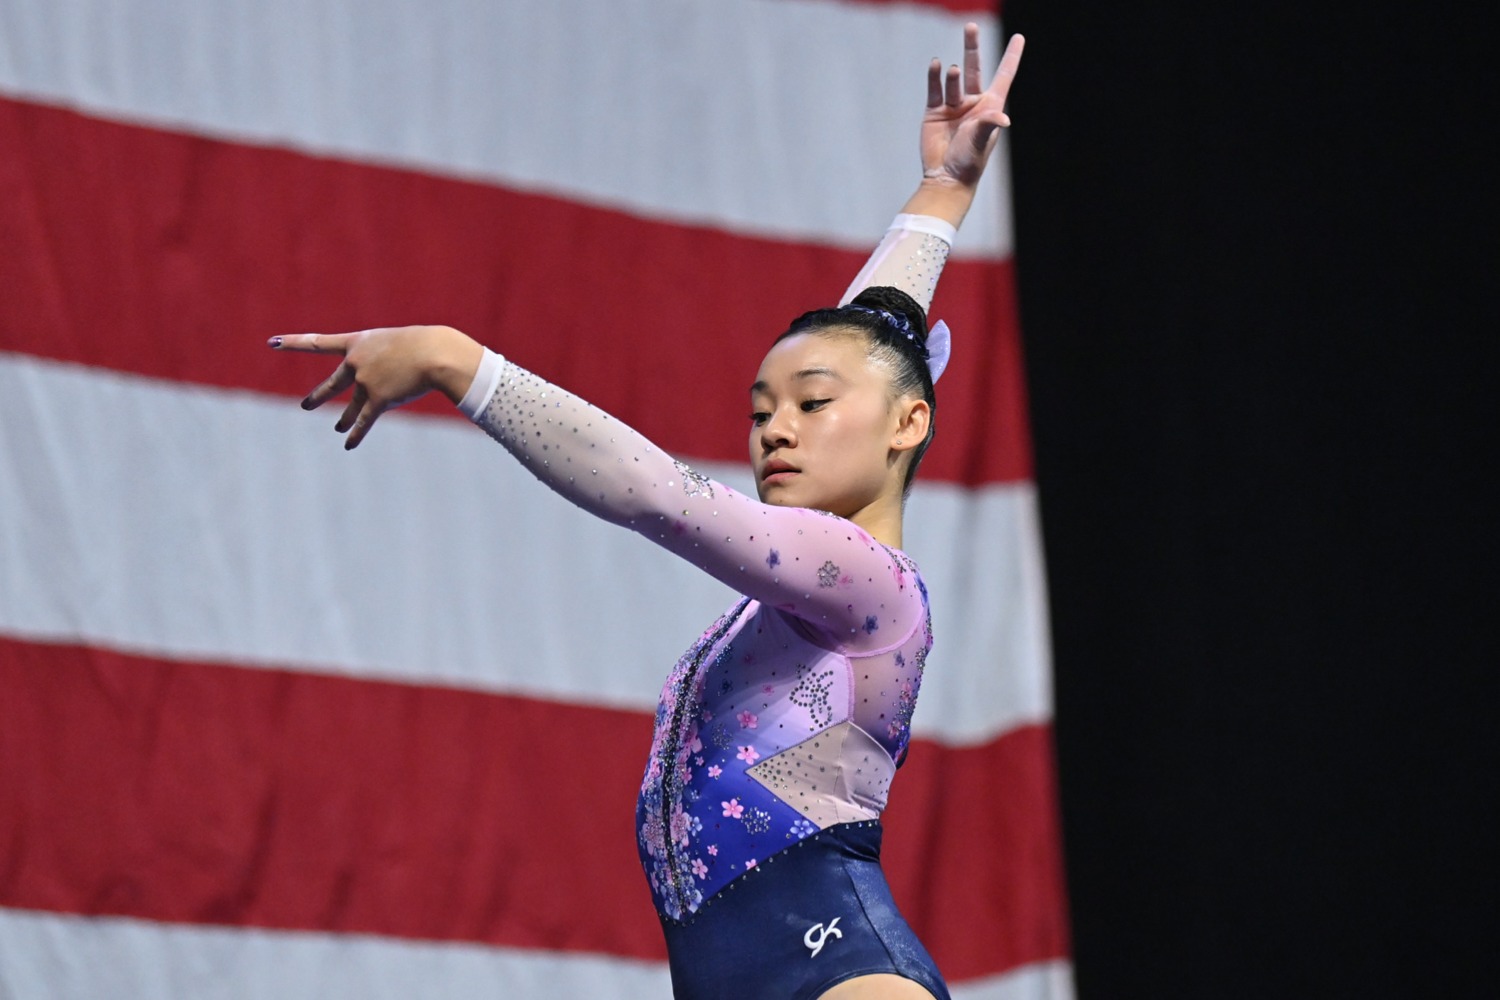 2022 U.S. Classic: Leanne Wong is back like she never left in all-around win